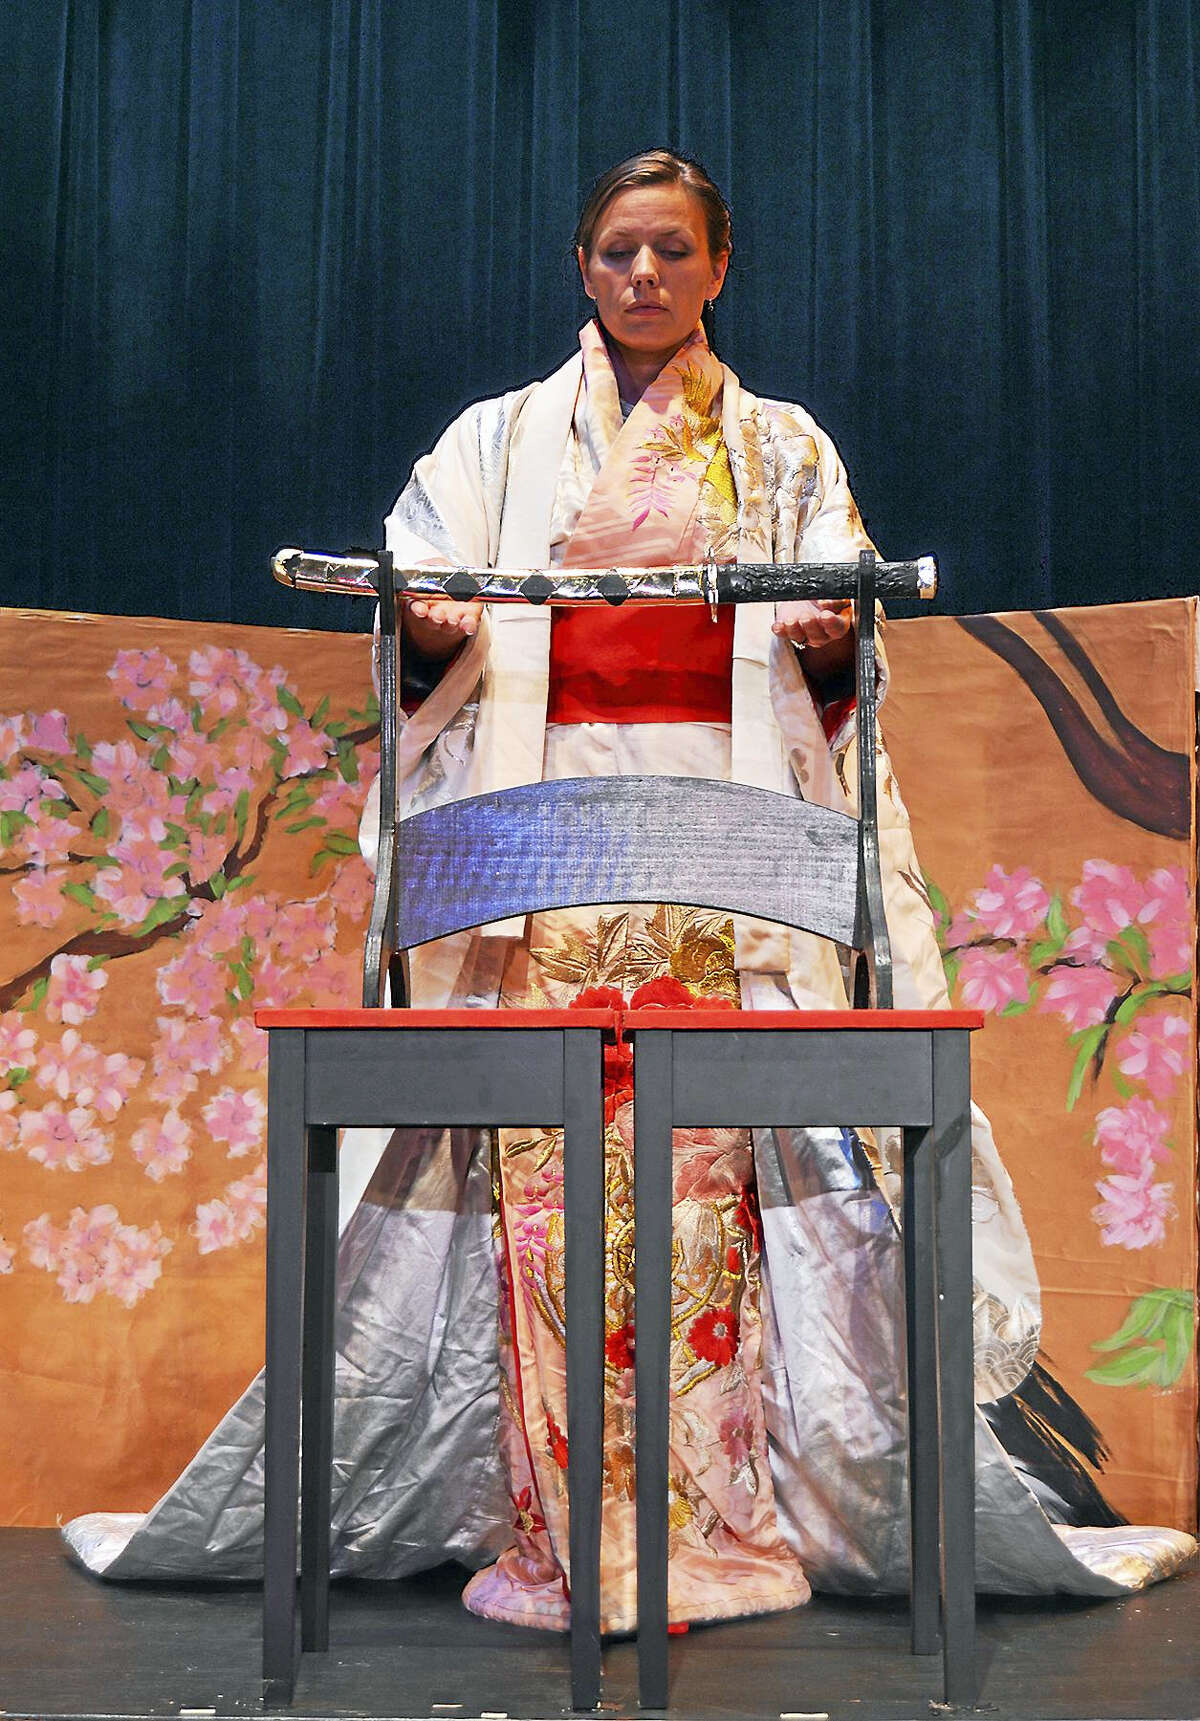 Shannon Kessler Dooley (Madama Butterfly) in formal wedding garb with a katana (samurai sword) in Opera Theater of Connecticut’s “Madama Butterfly.”